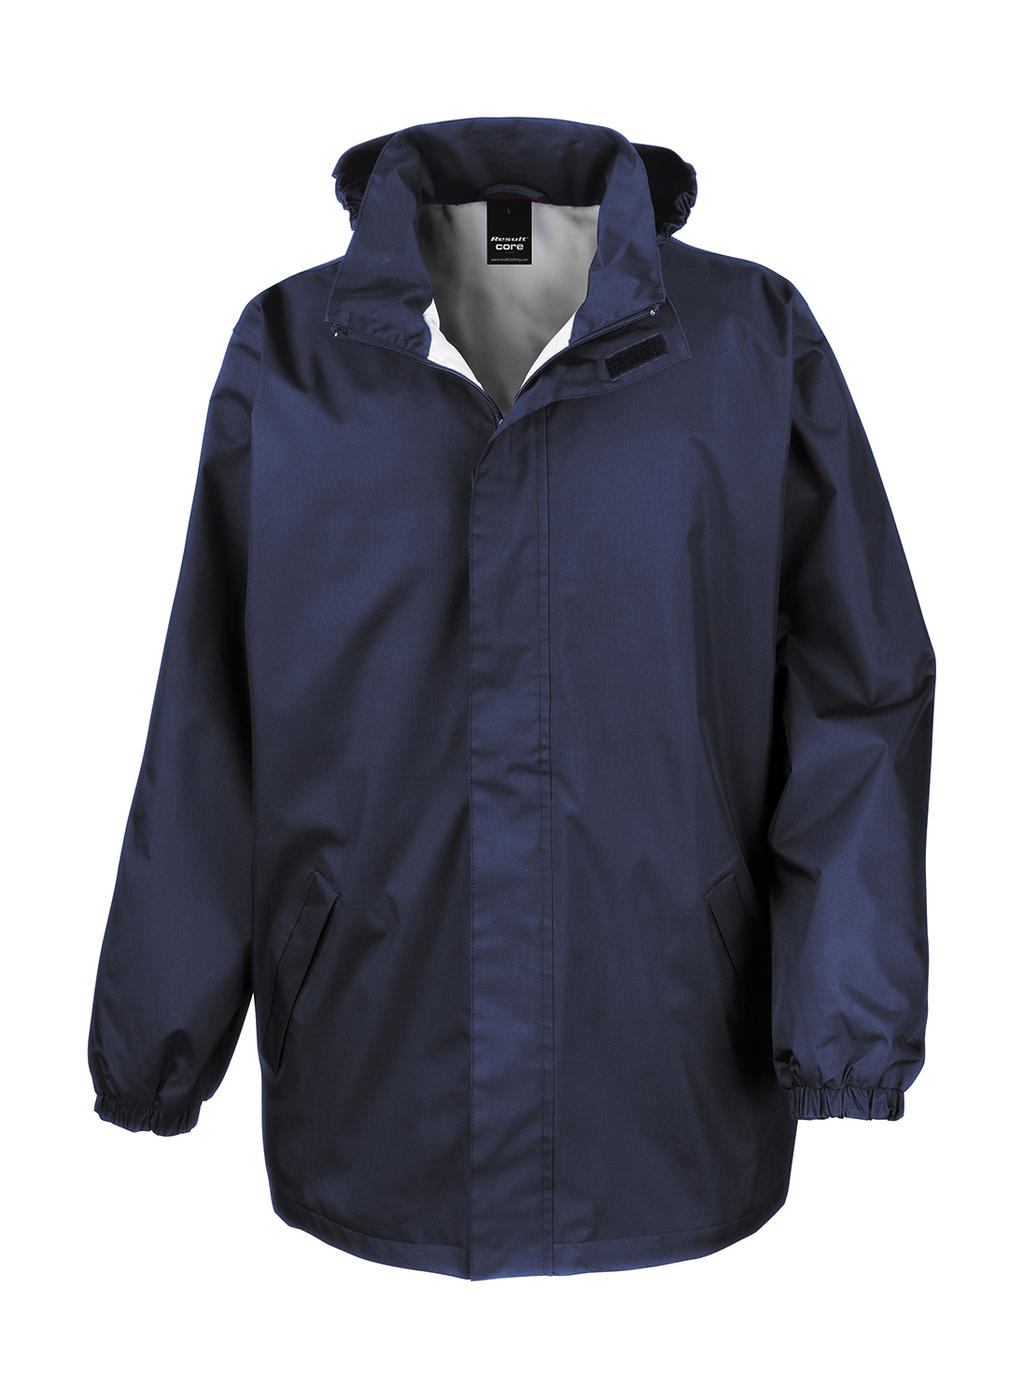  Core Midweight Jacket in Farbe Navy